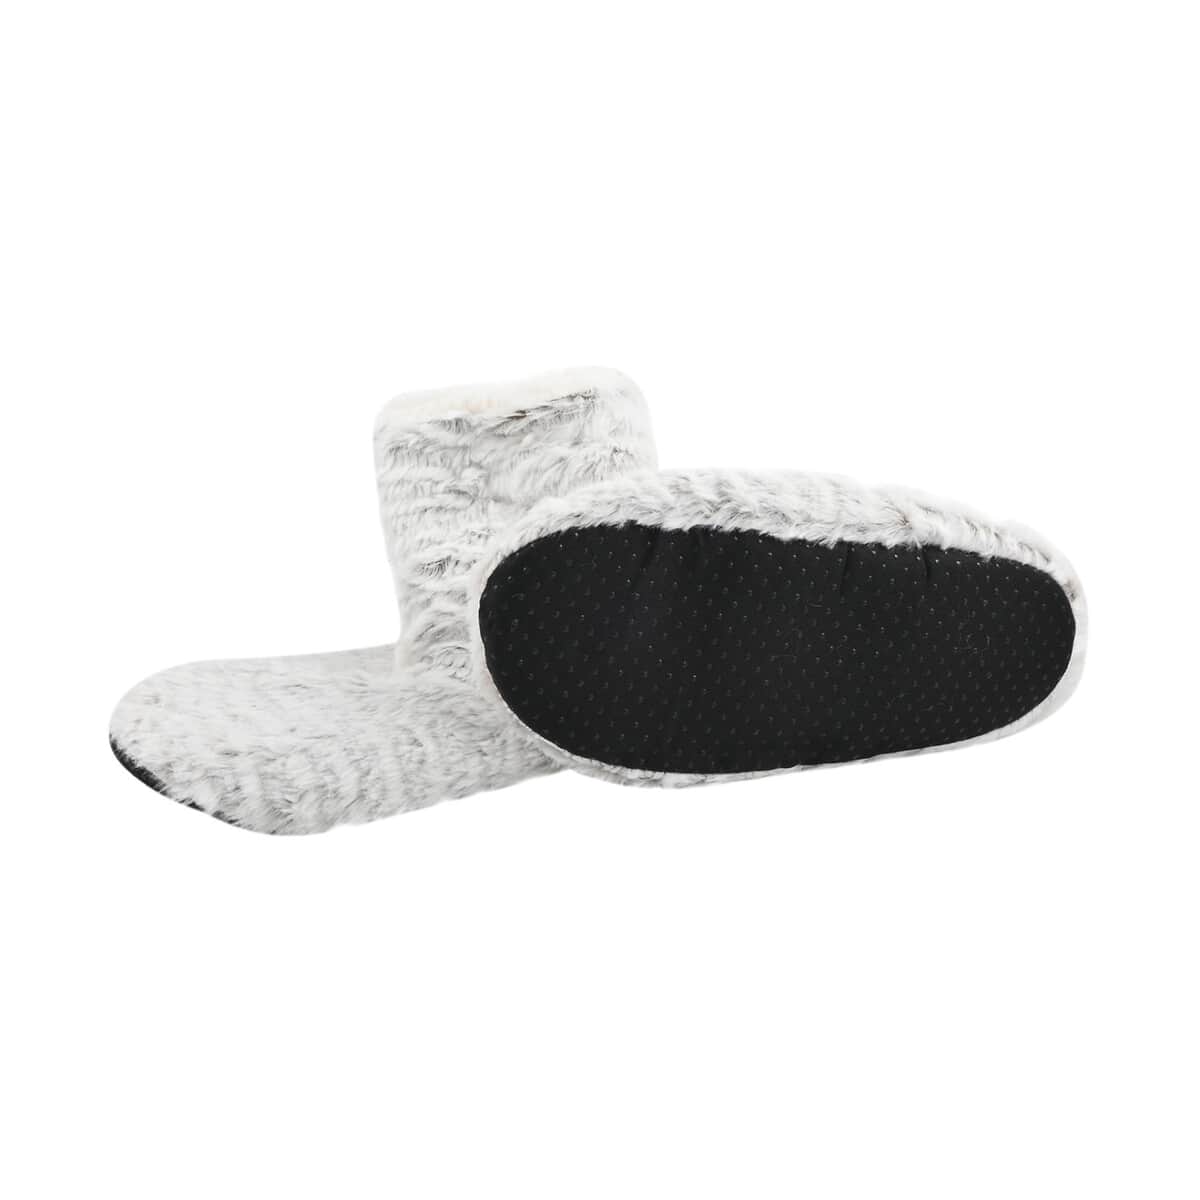 Homesmart Microfiber Faux Fur, Sherpa Booties and Matching Ballerina Slippers (Women's Size 5-10) image number 3